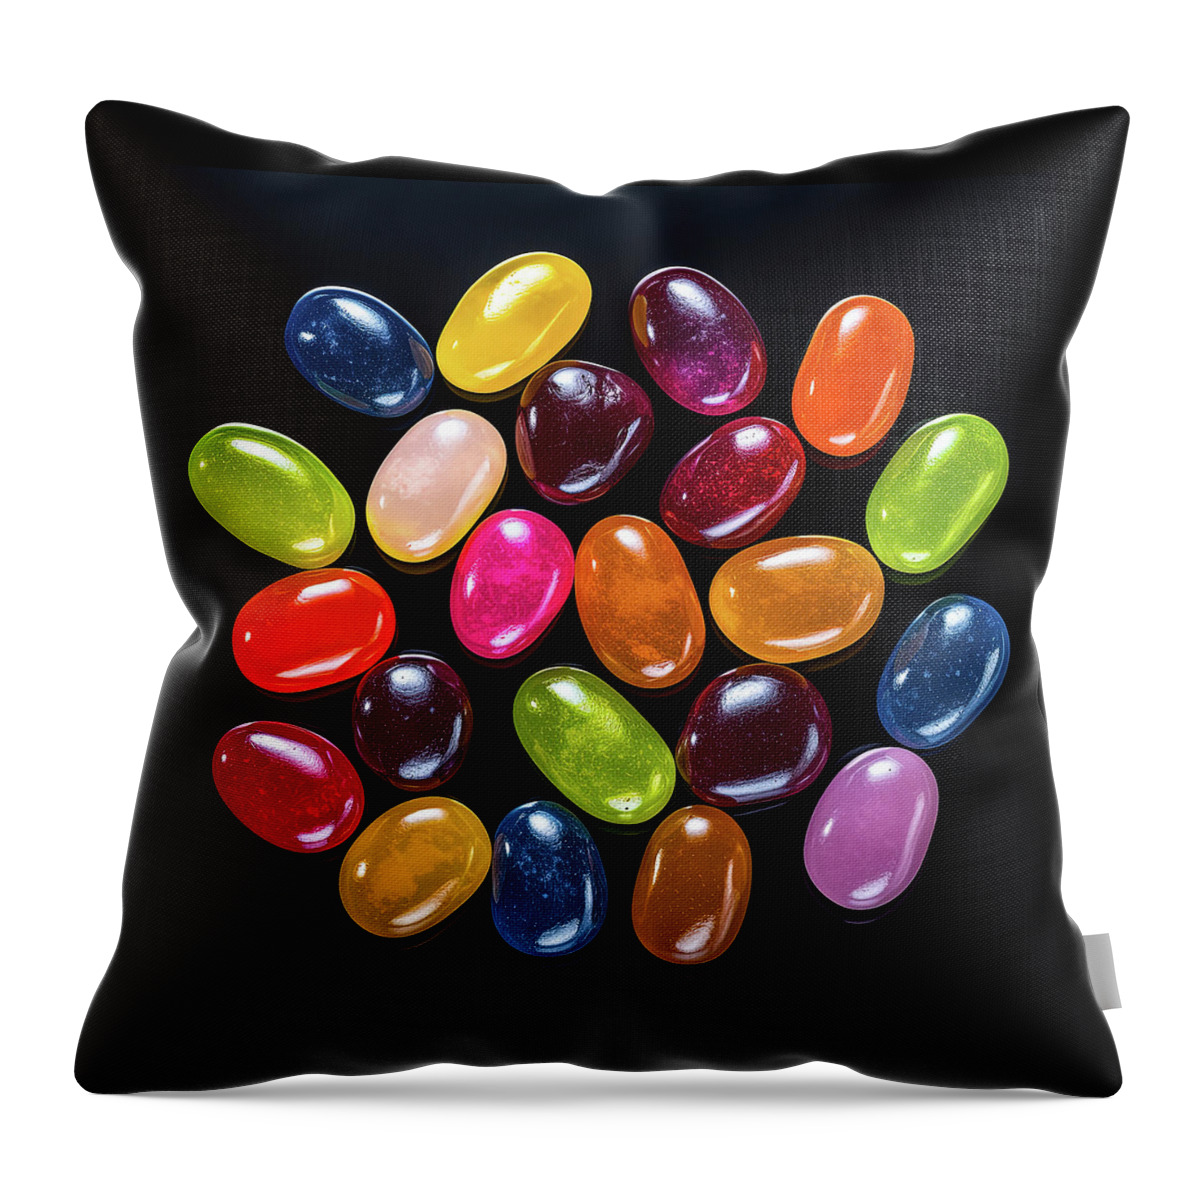 Jelly Beans Throw Pillow featuring the digital art Jelly Beans on Black by Mark Tisdale